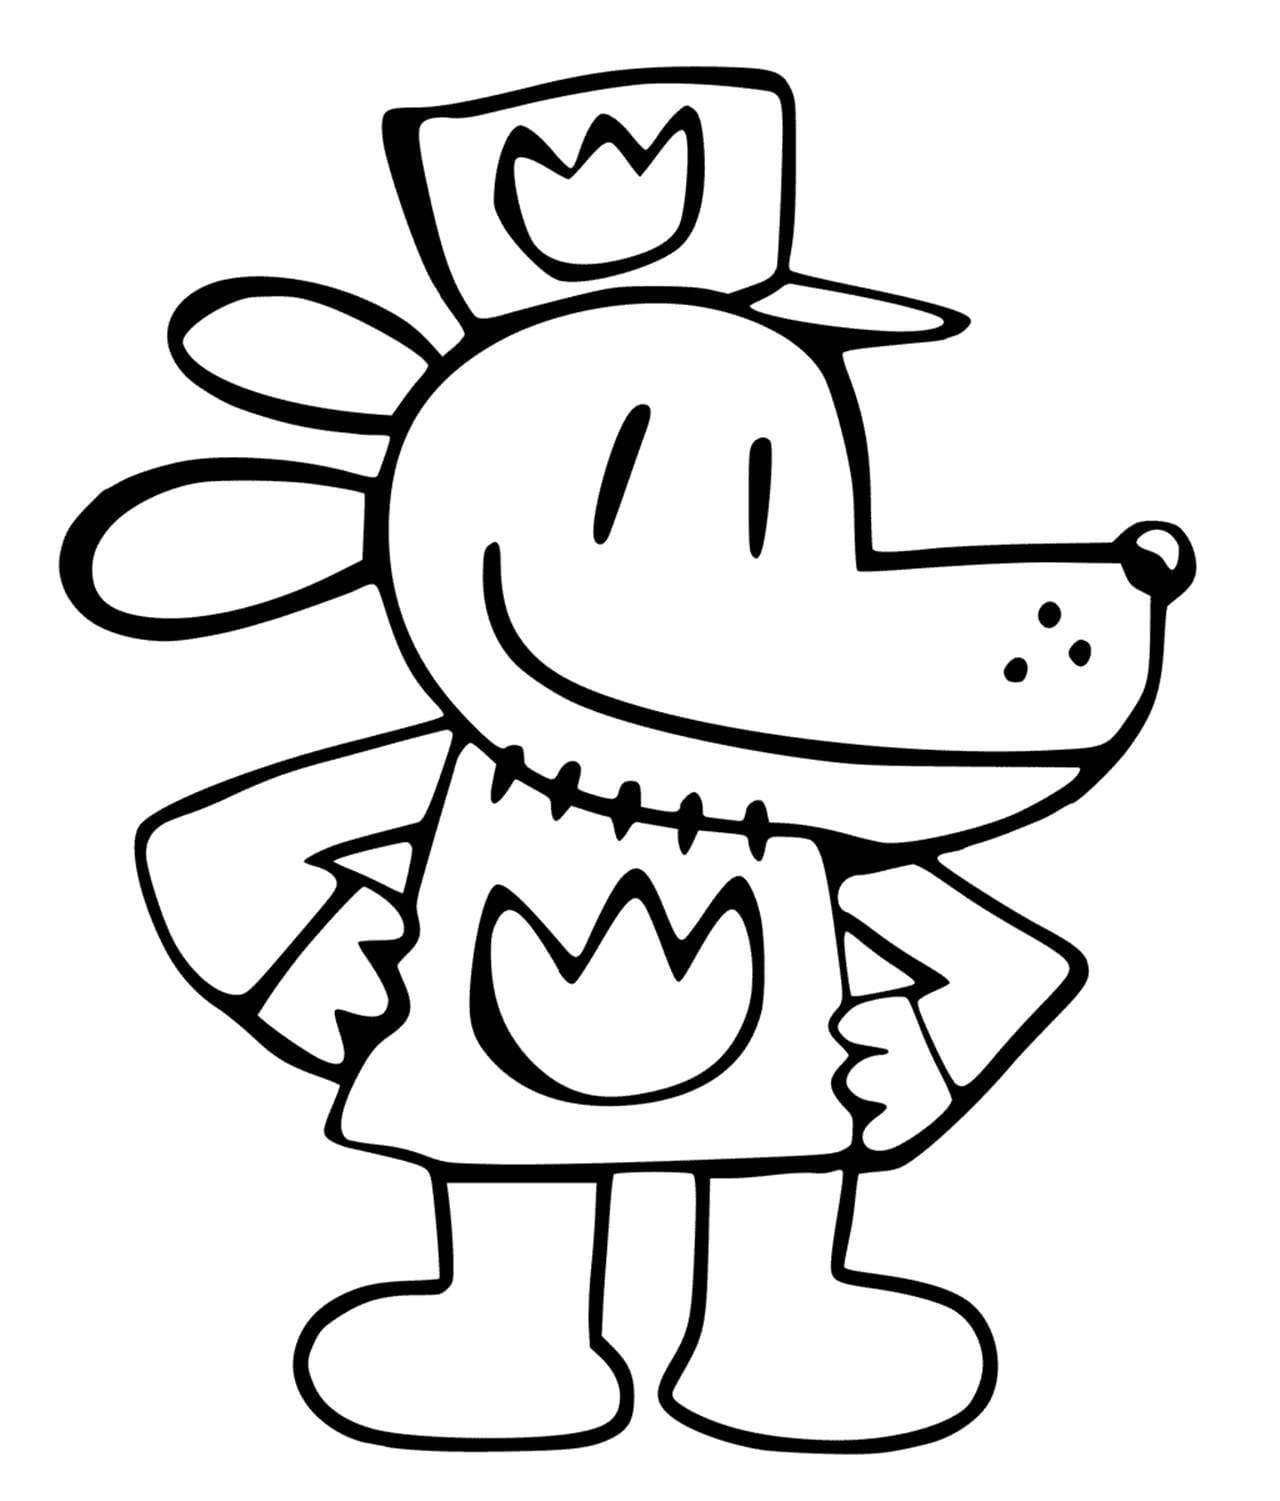 Dog Man Coloring Pages Free Coloring Pages